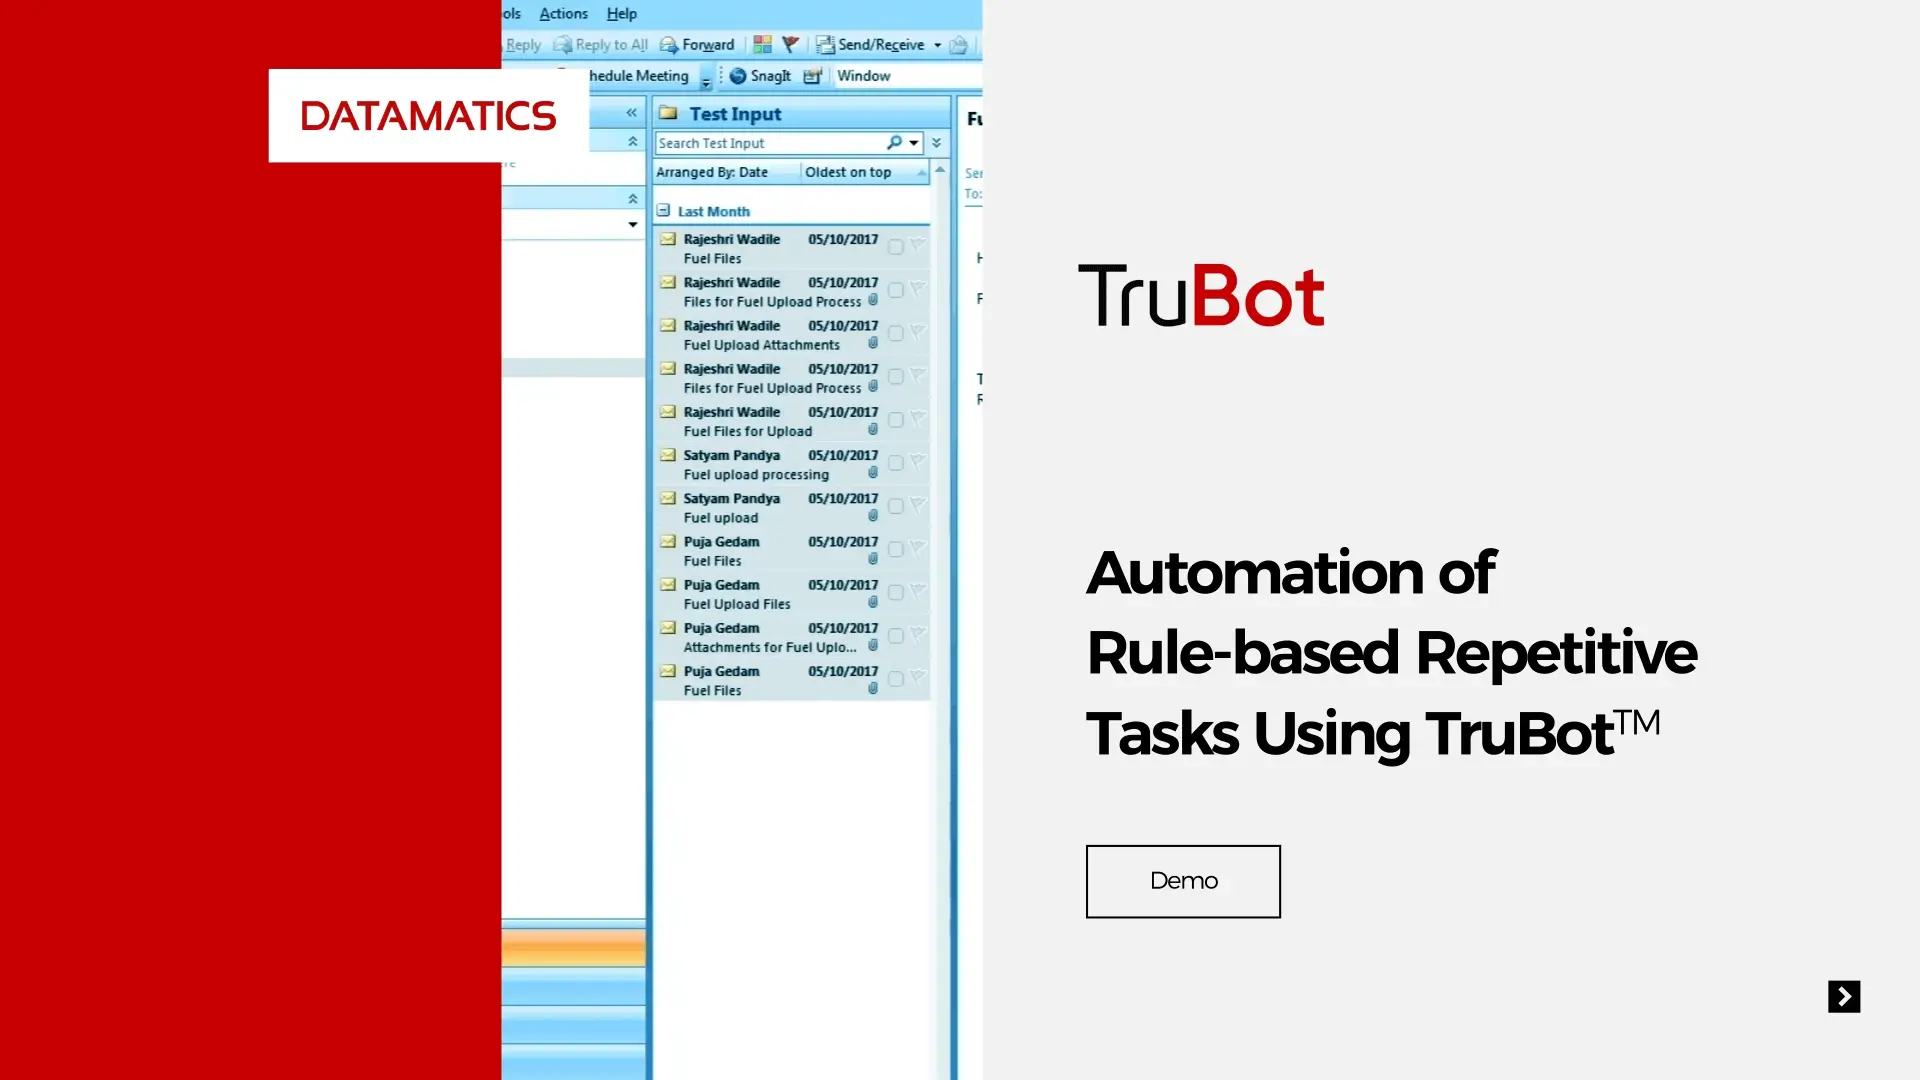 Automation of Rule-based Repetitive Tasks Using TruBot Demo